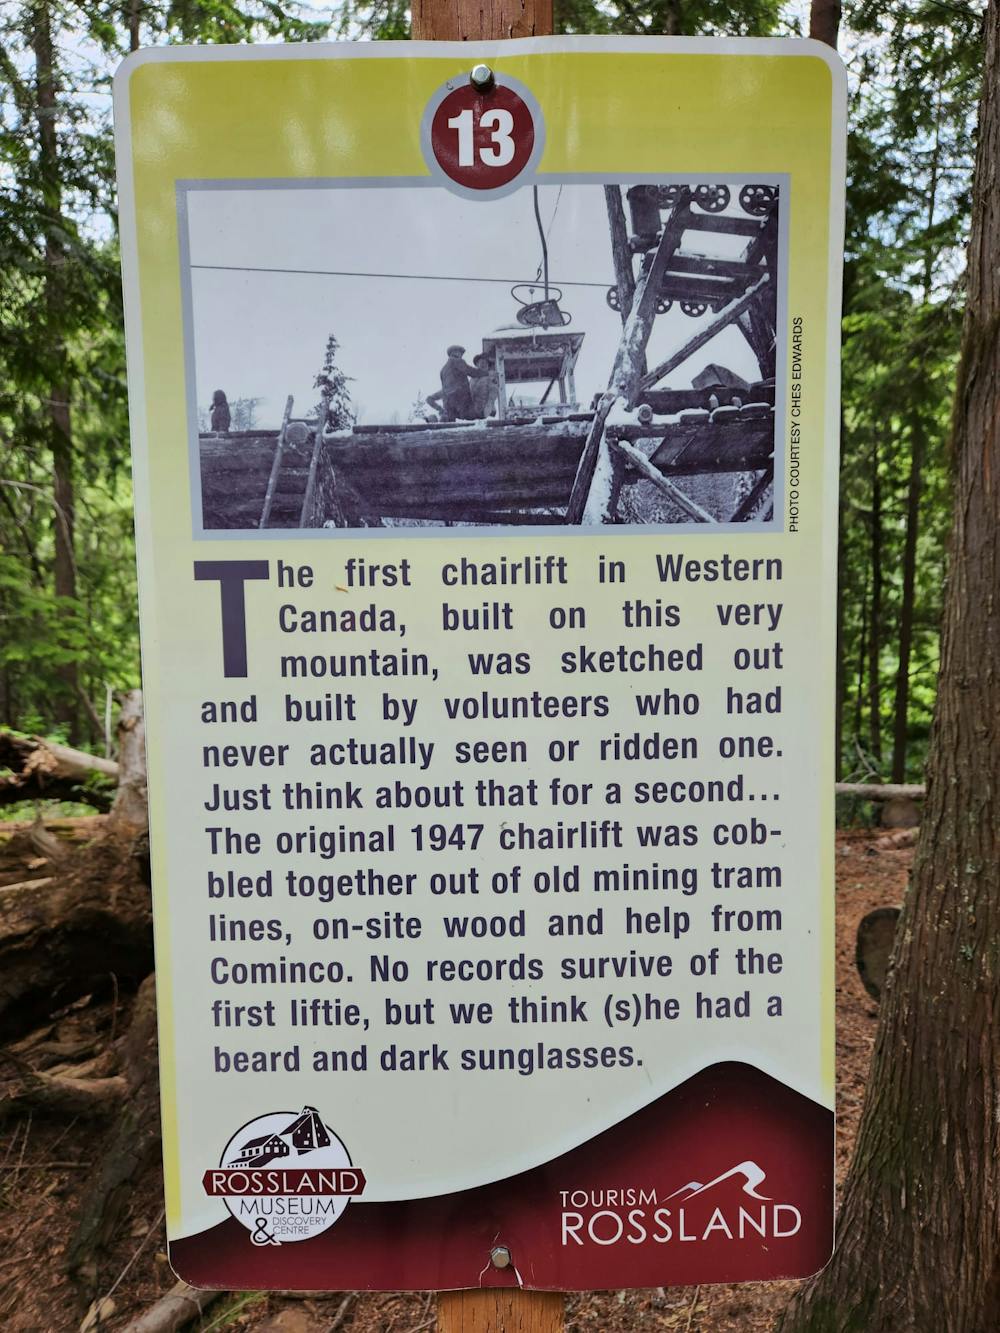 A bit of Kootenay humour on one of the information boards